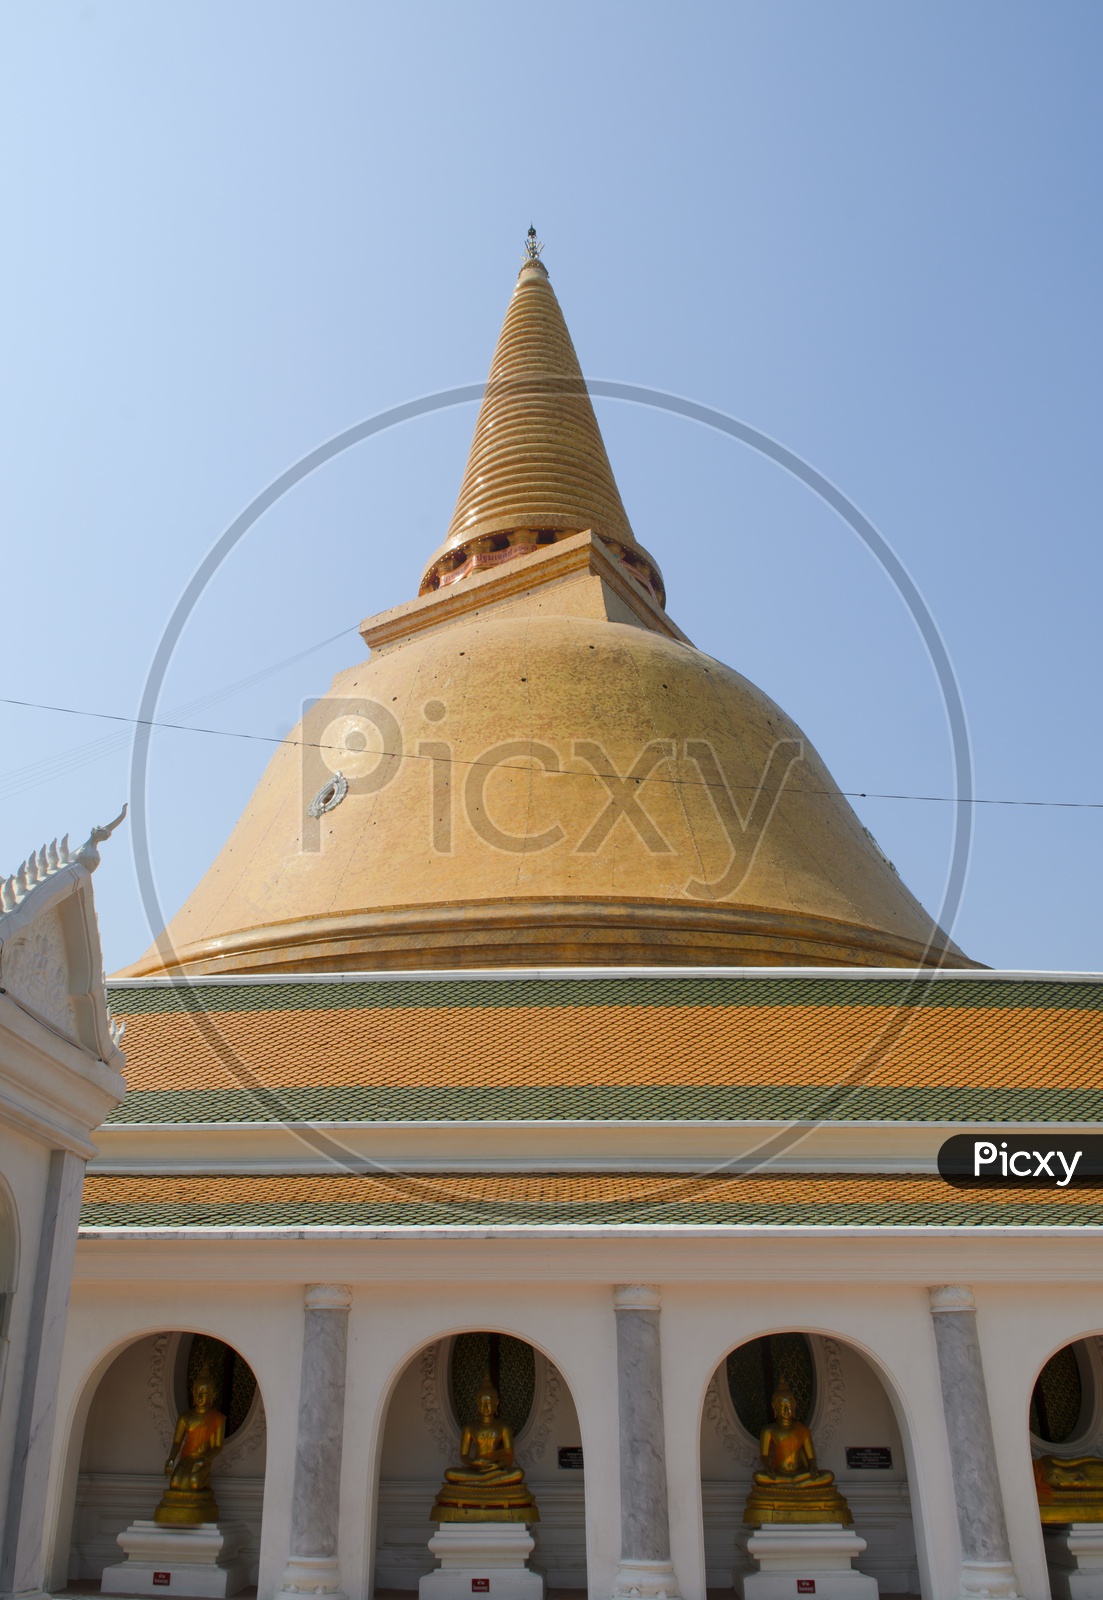 Phra Pathom Chedi, the tallest stupa in the world. It is located in the town of Nakhon Pathom, Thailand.